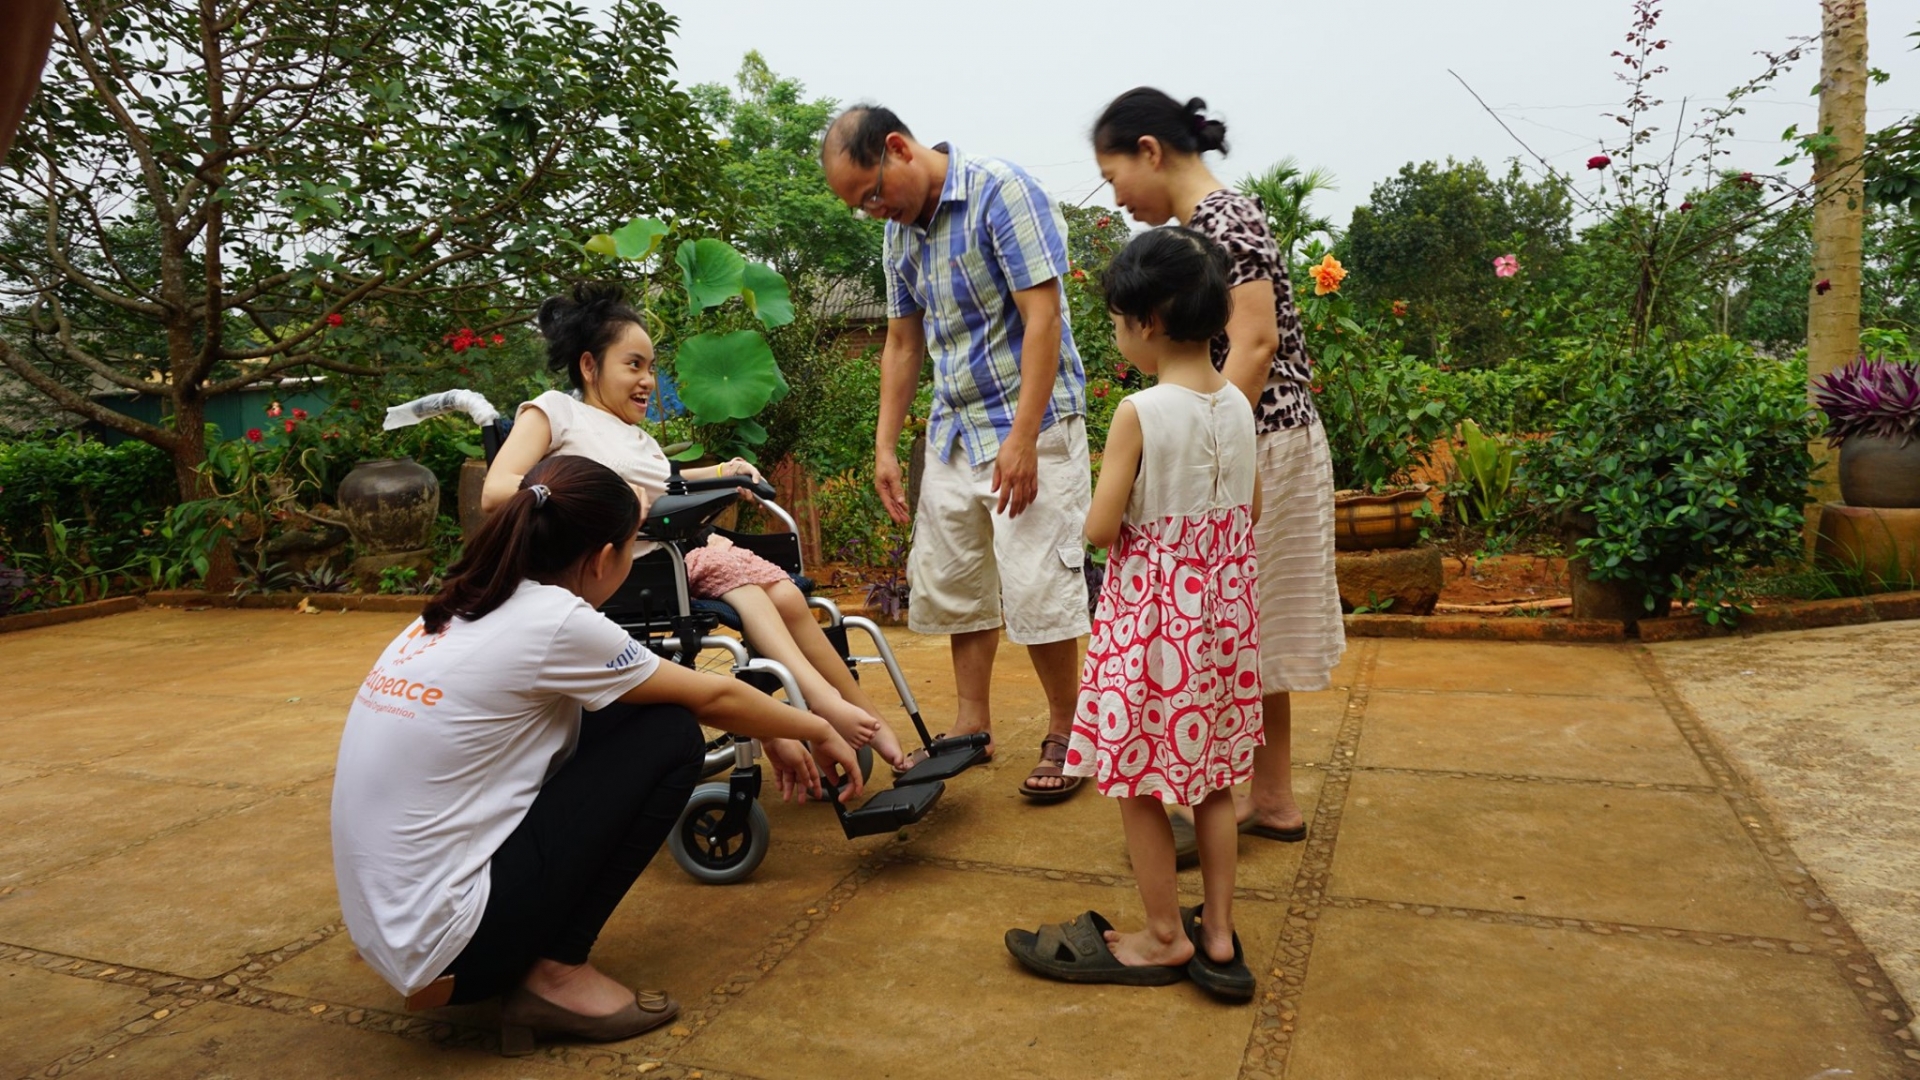 medipeace vietnam presents electric wheelchairs to children in quang tri